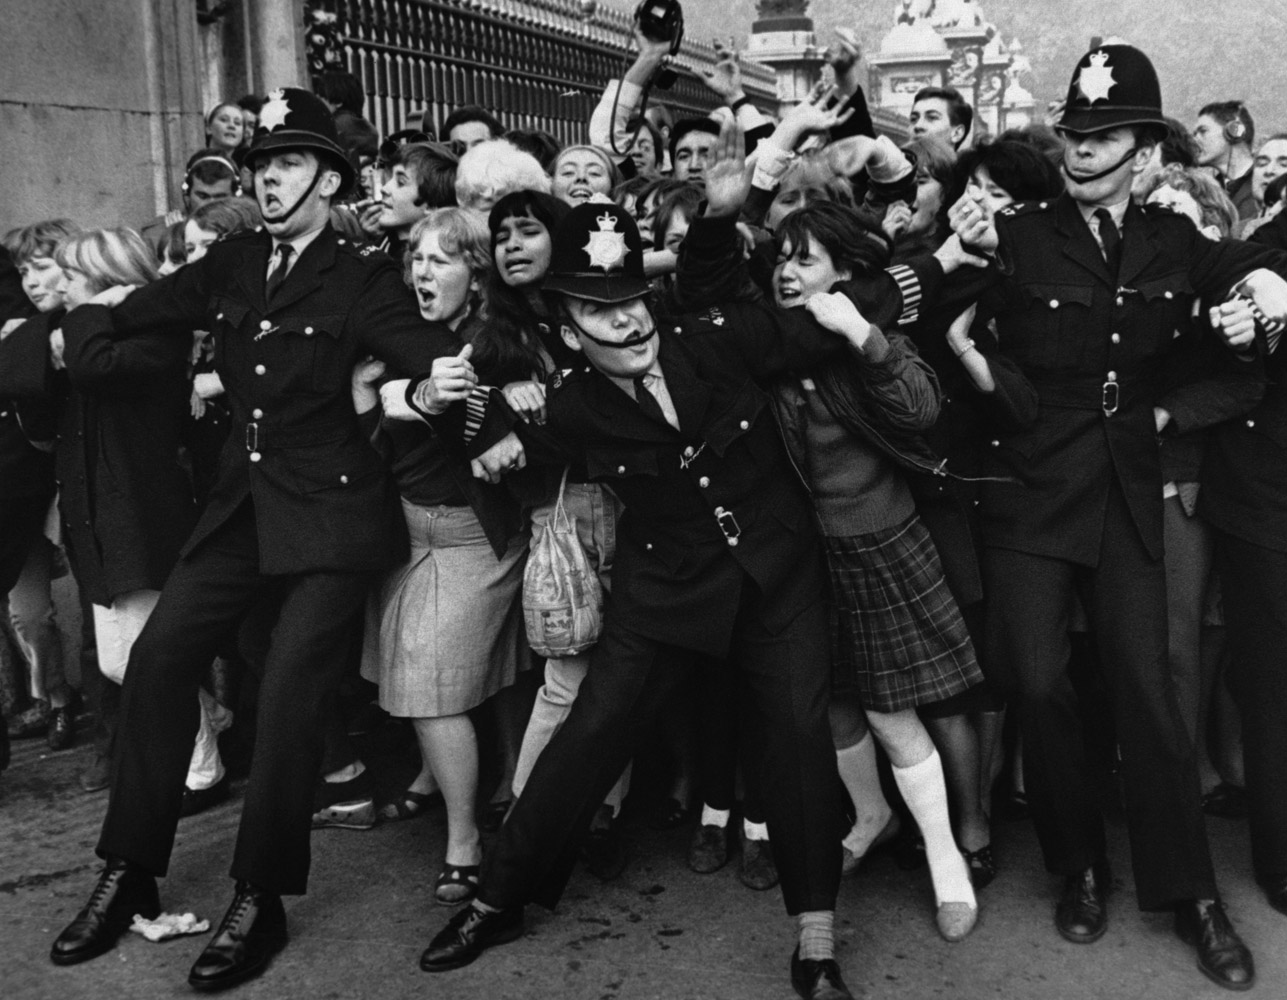 Policemen struggle to restrain young Beatles fans outside Buckingham Palace as The Beatles receive their MBEs (Member of the British Empire) in October 1965.  London, England.  John Lennon later returned his MBE in September 1969, in protest against British politics.